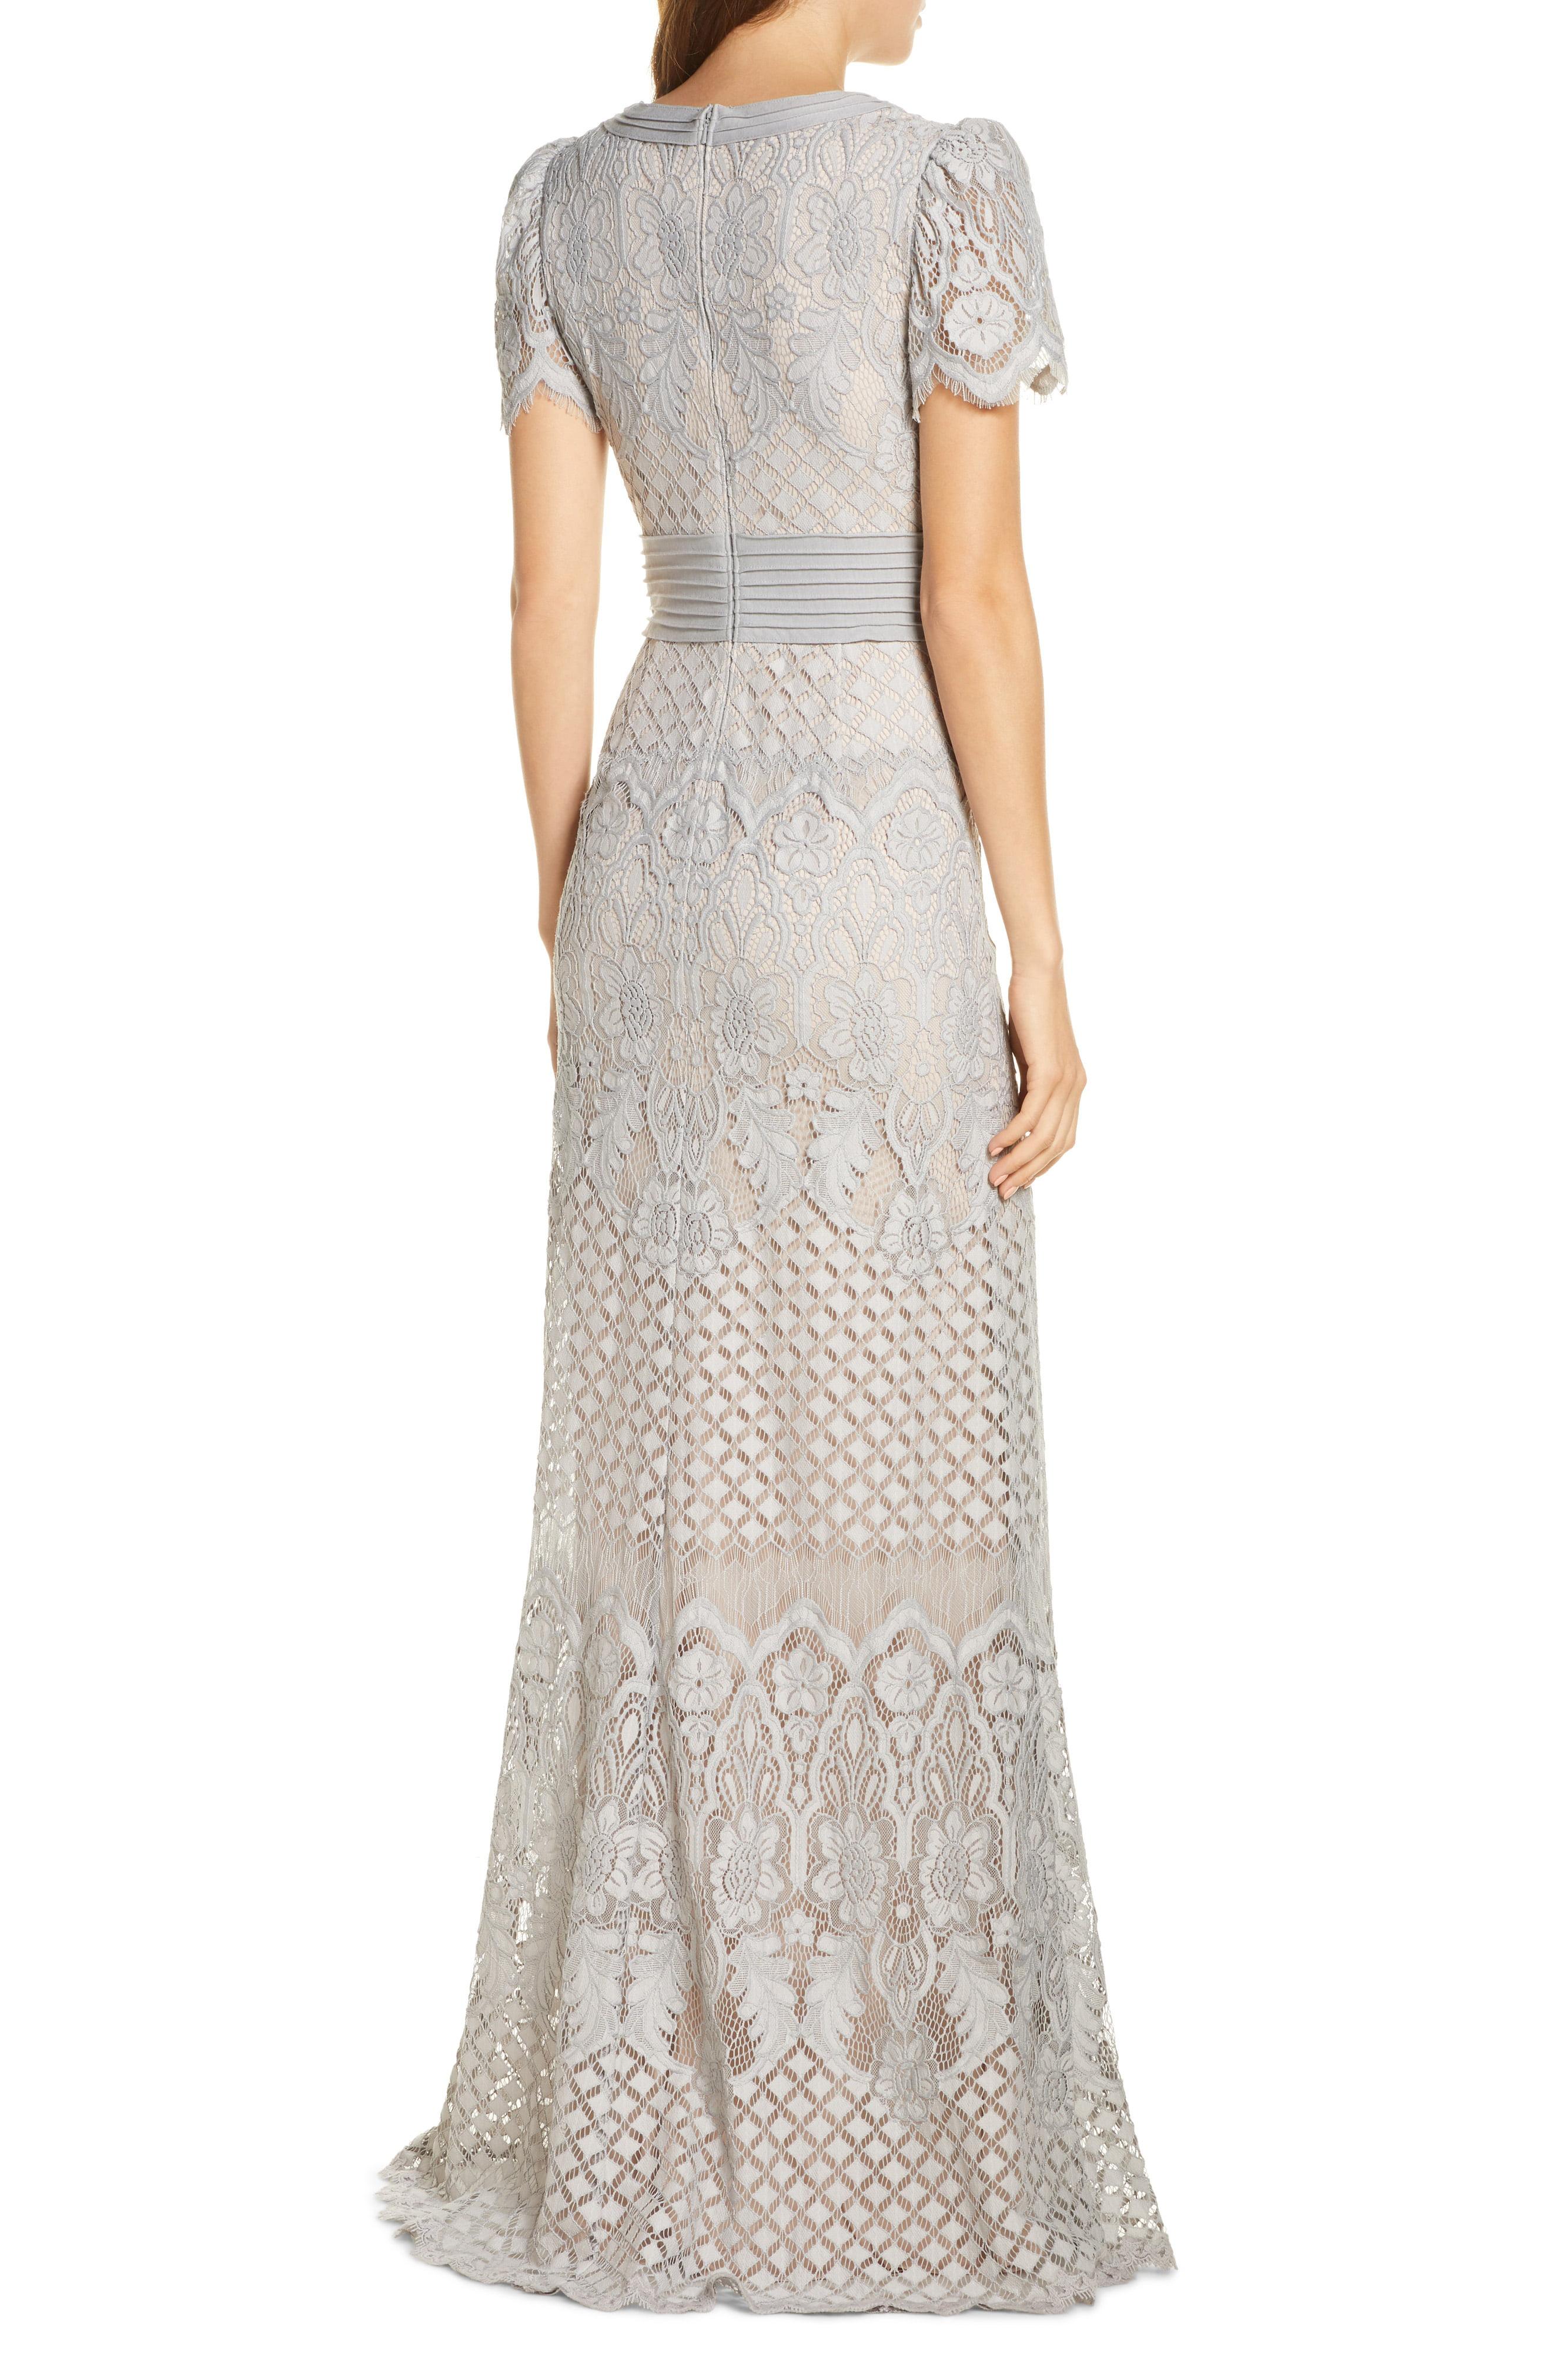 Tadashi Shoji Embroidered Lace Evening Gown in Metallic - Lyst